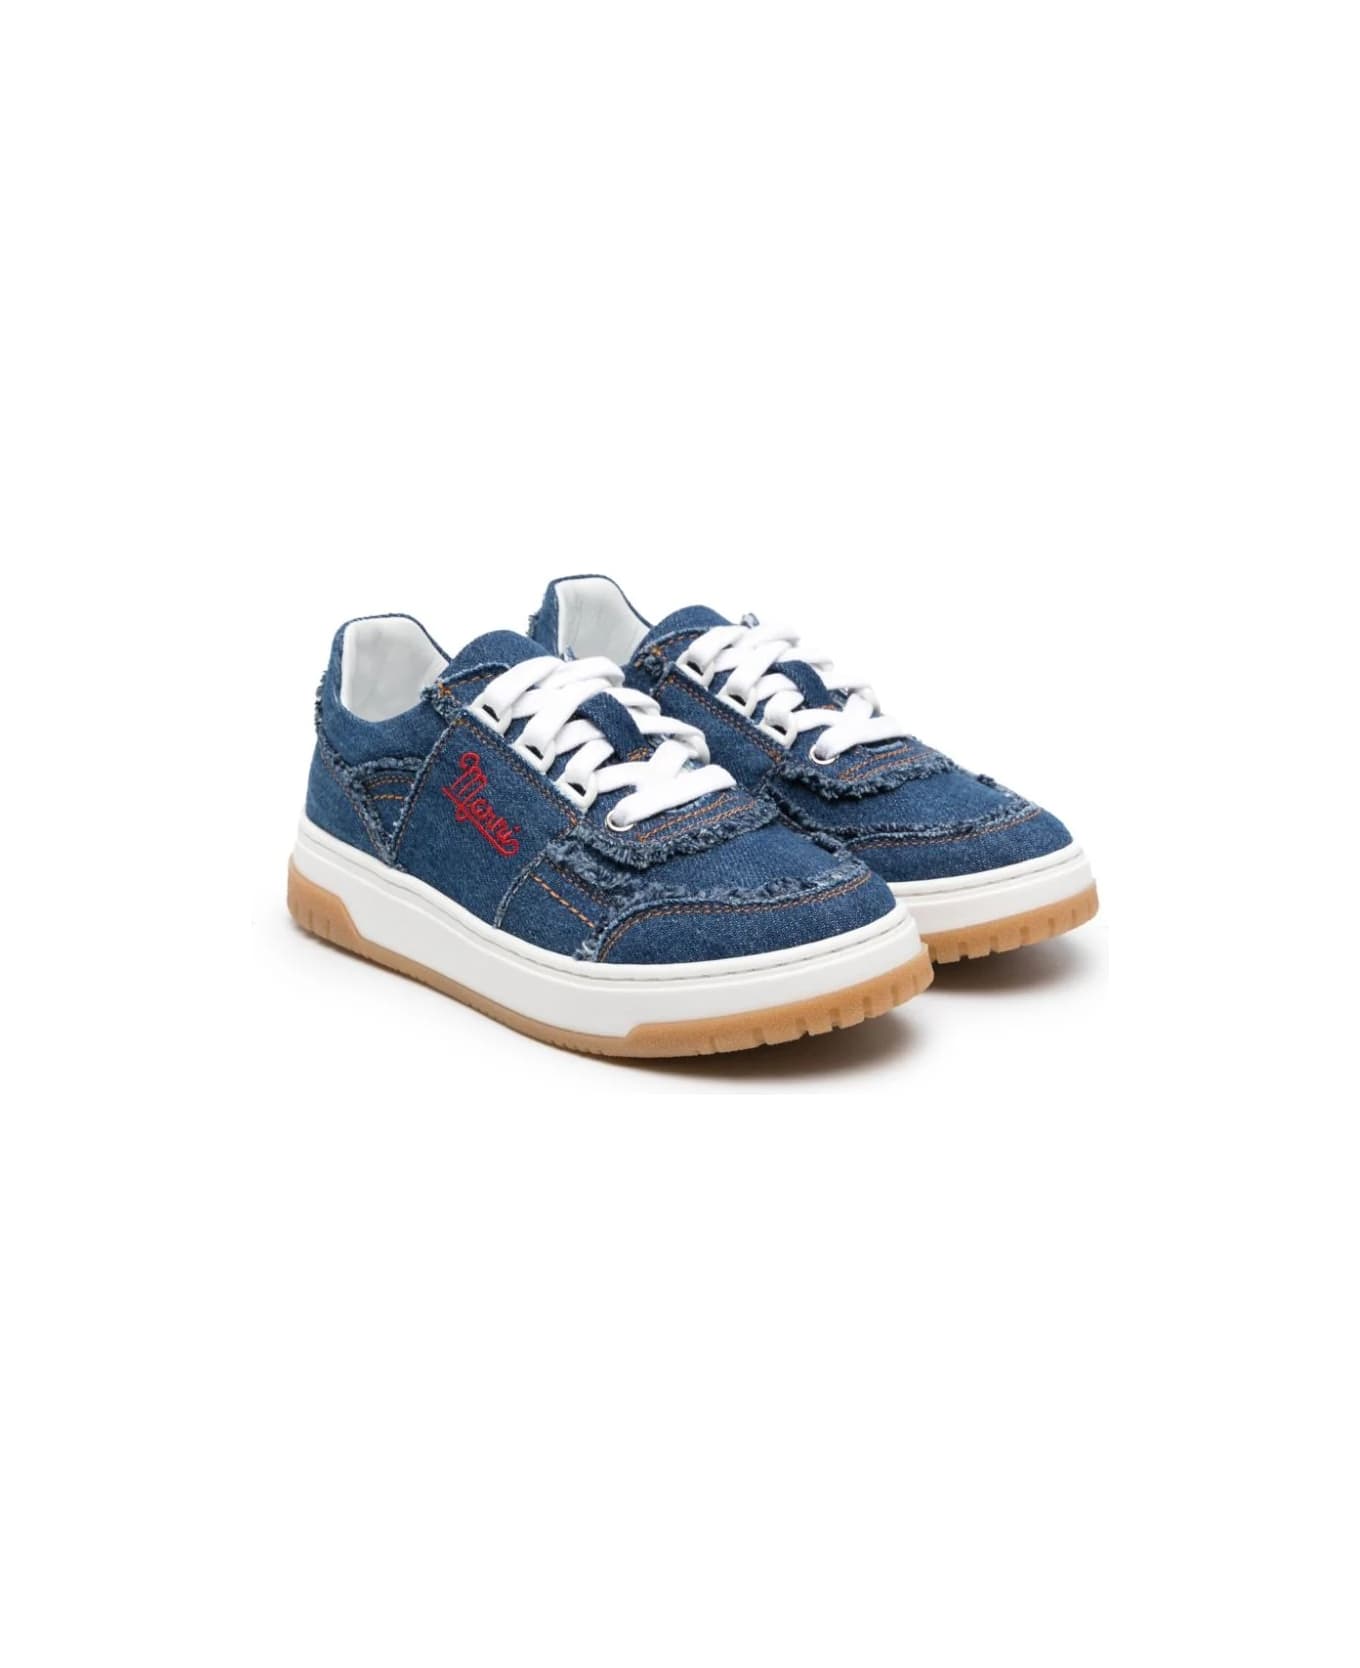 Marni Denim Sneakers With Inserts - Blue